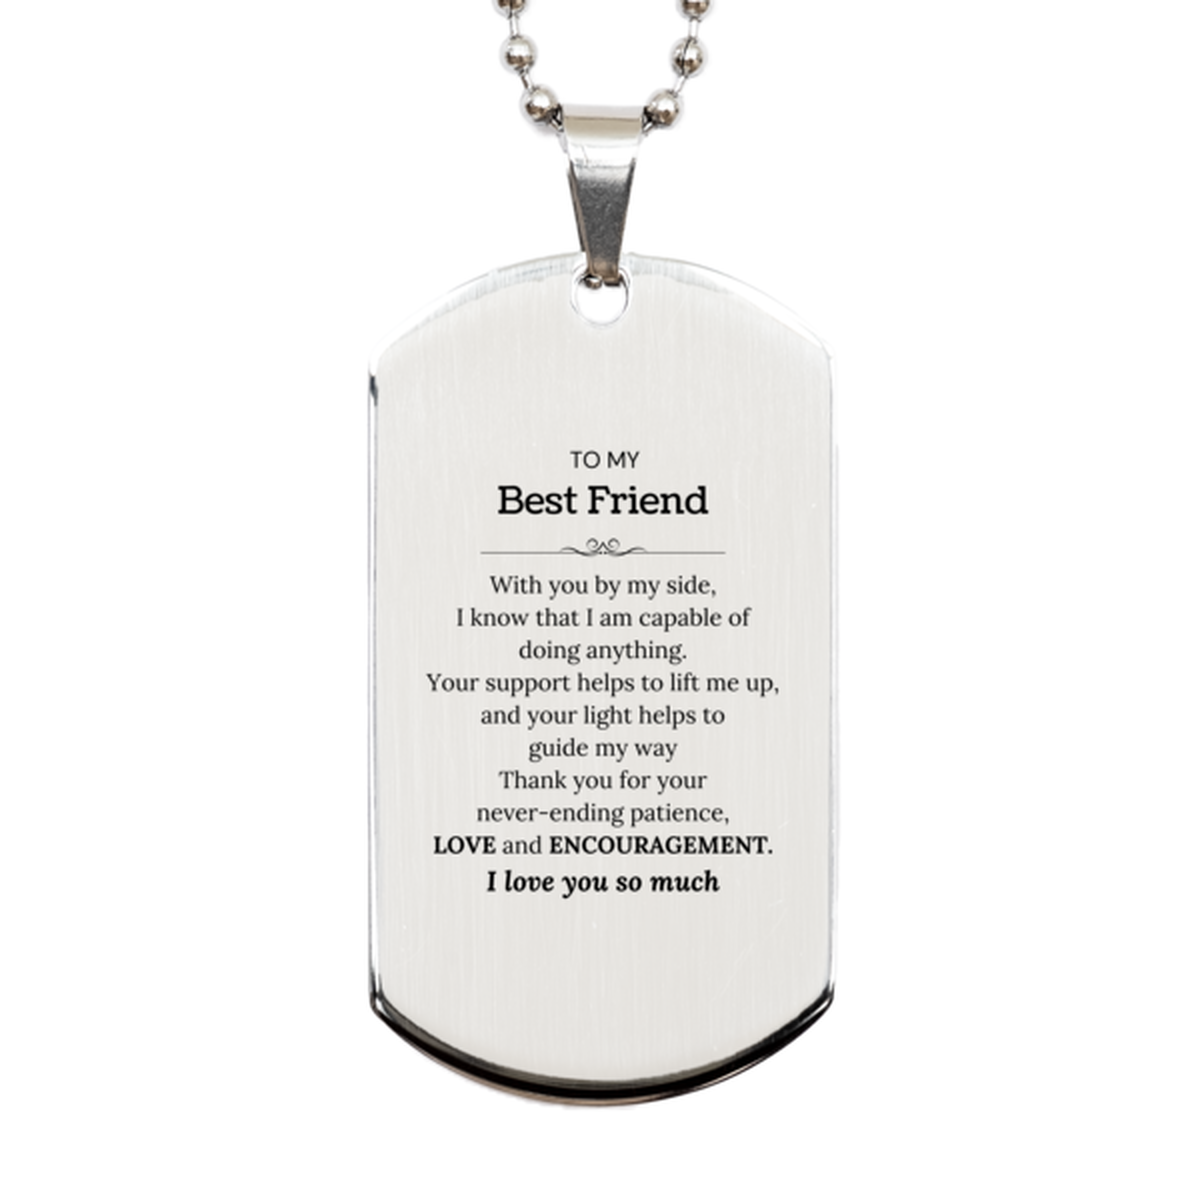 Appreciation Best Friend Silver Dog Tag Gifts, To My Best Friend Birthday Christmas Wedding Keepsake Gifts for Best Friend With you by my side, I know that I am capable of doing anything. I love you so much